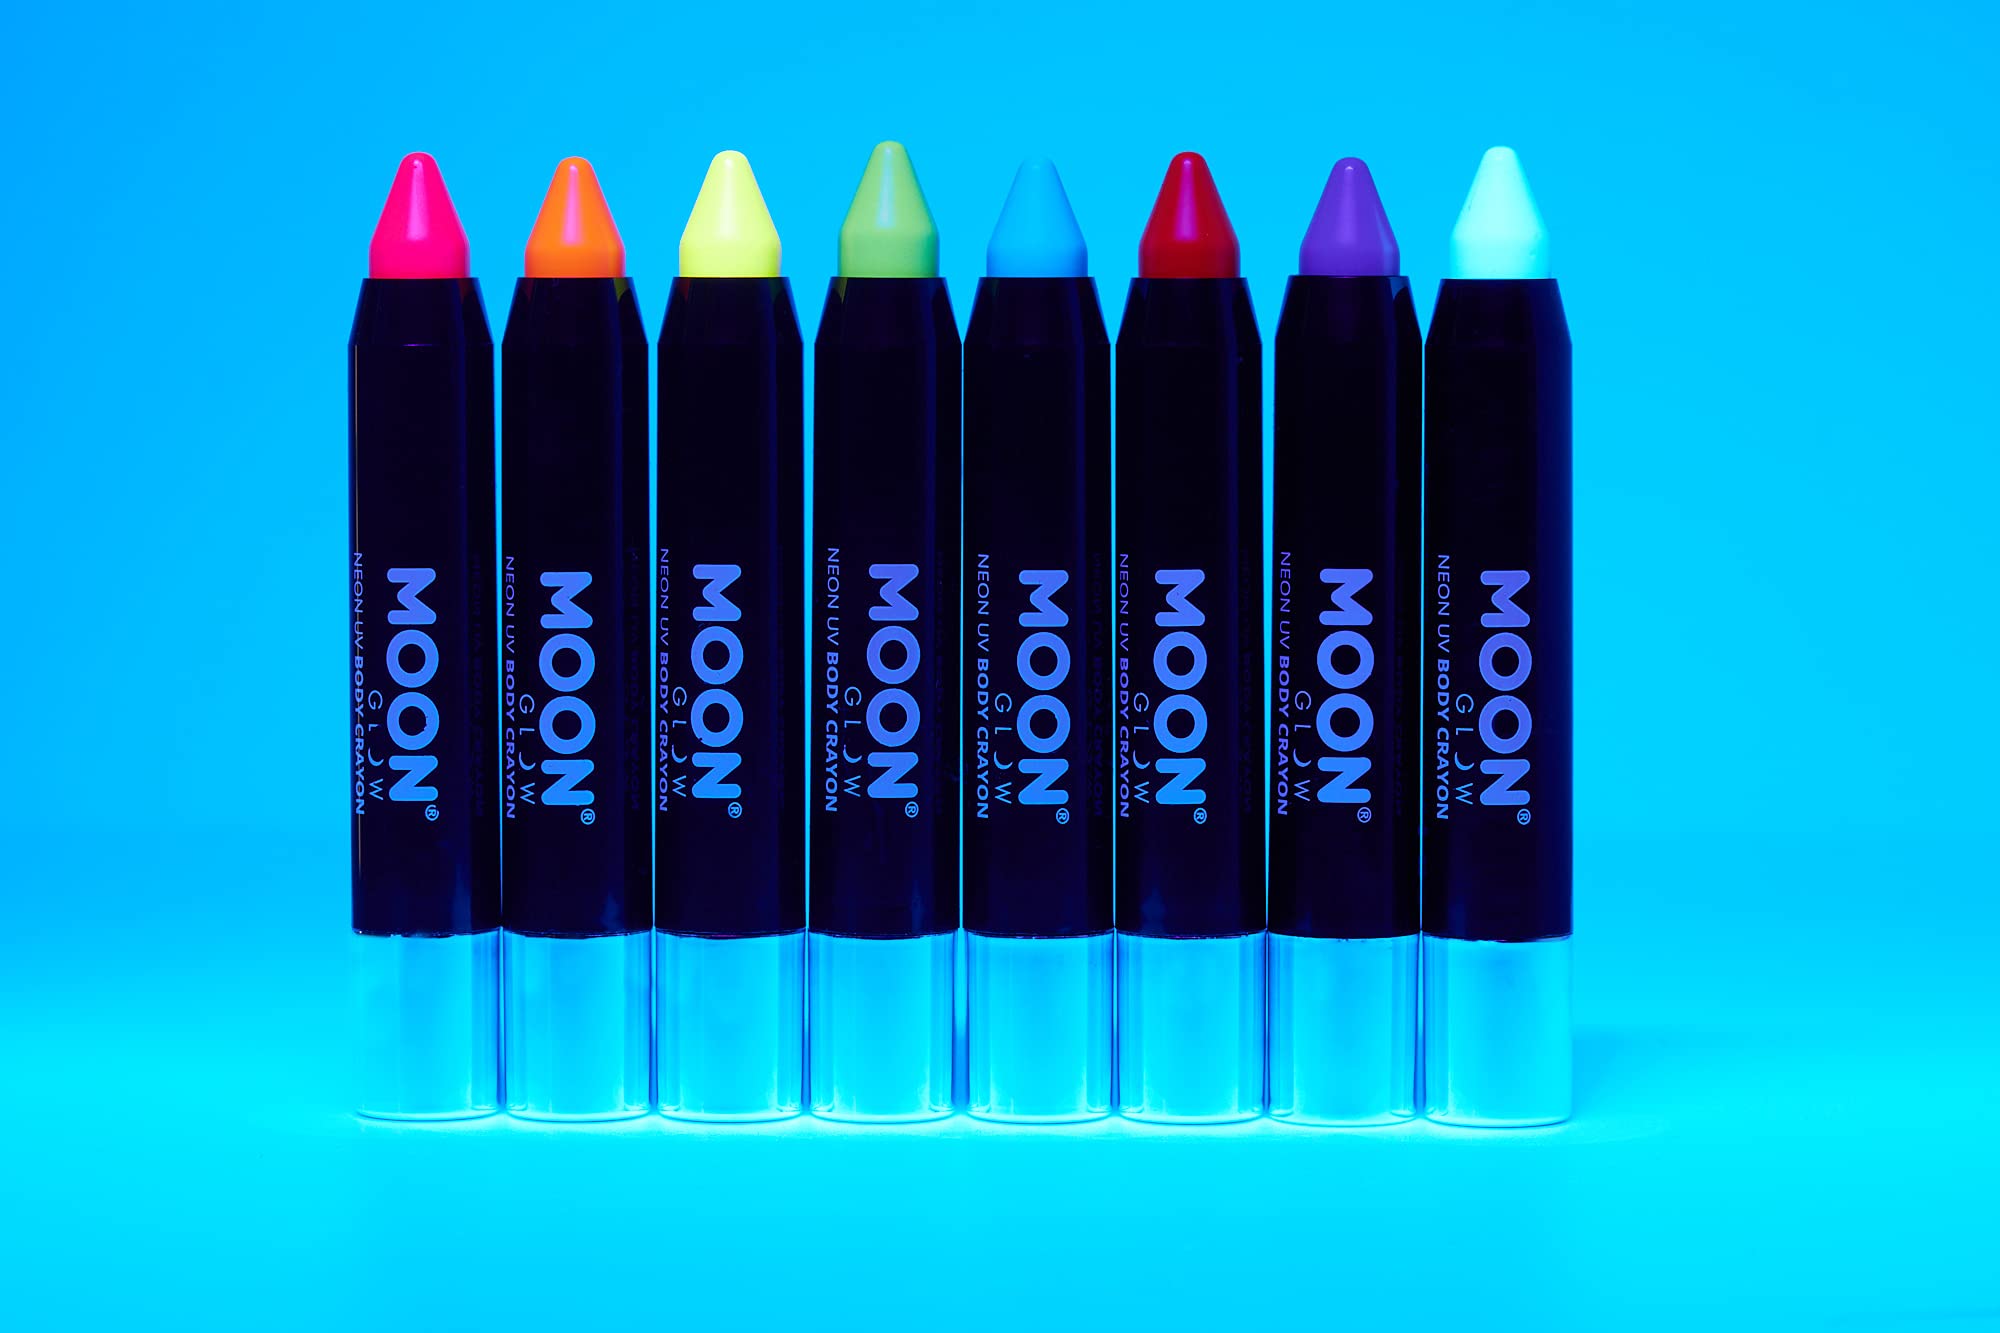 Moon Glow - Neon UV Paint Stick Body Crayon for The Face & Body – White